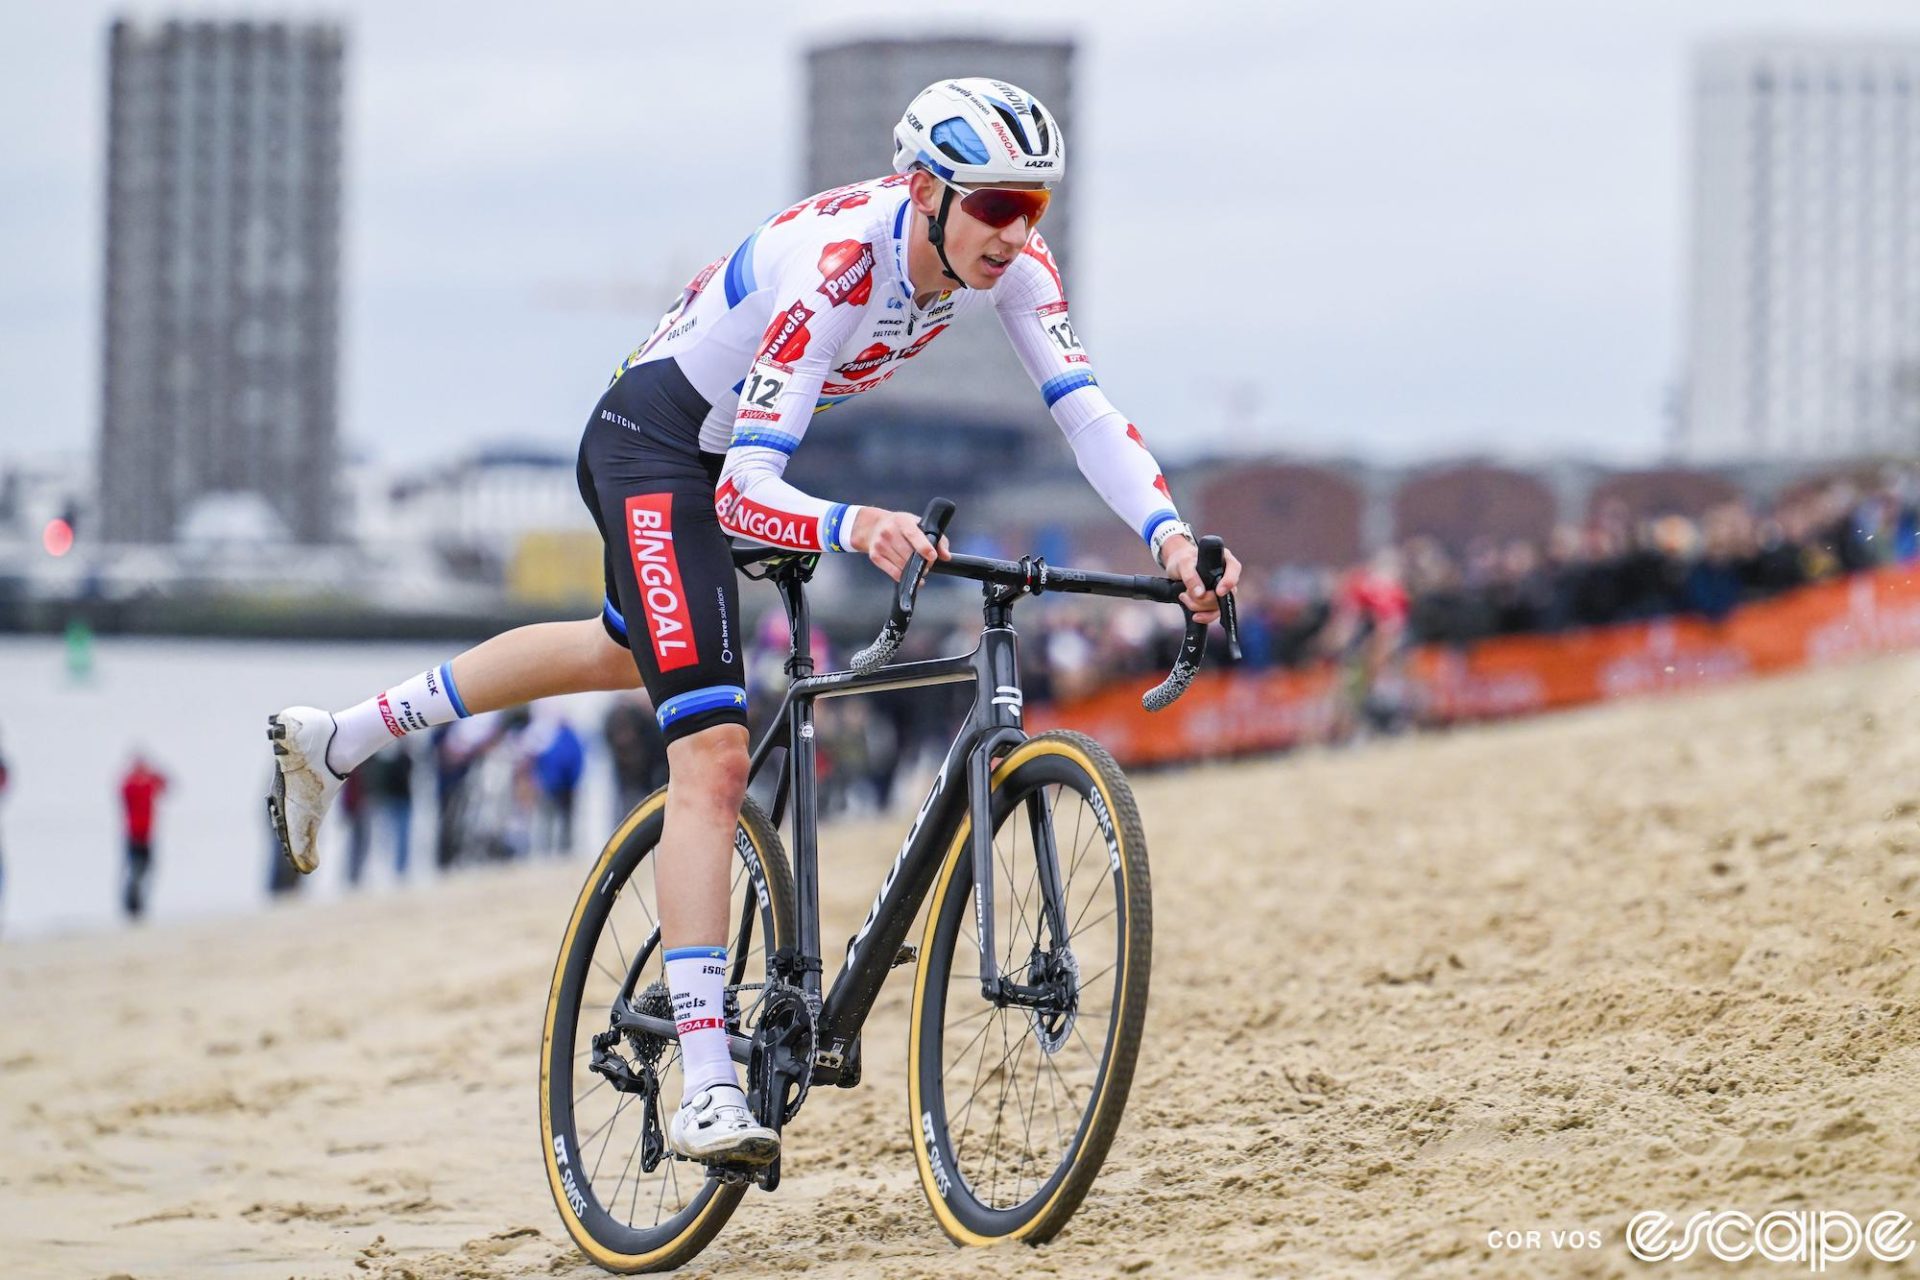 Michael Vanthourenhout dismounts on the beach. He gets off to the right side of the bike, which is different than the majority of riders, and is one of the only top crossers to do this.